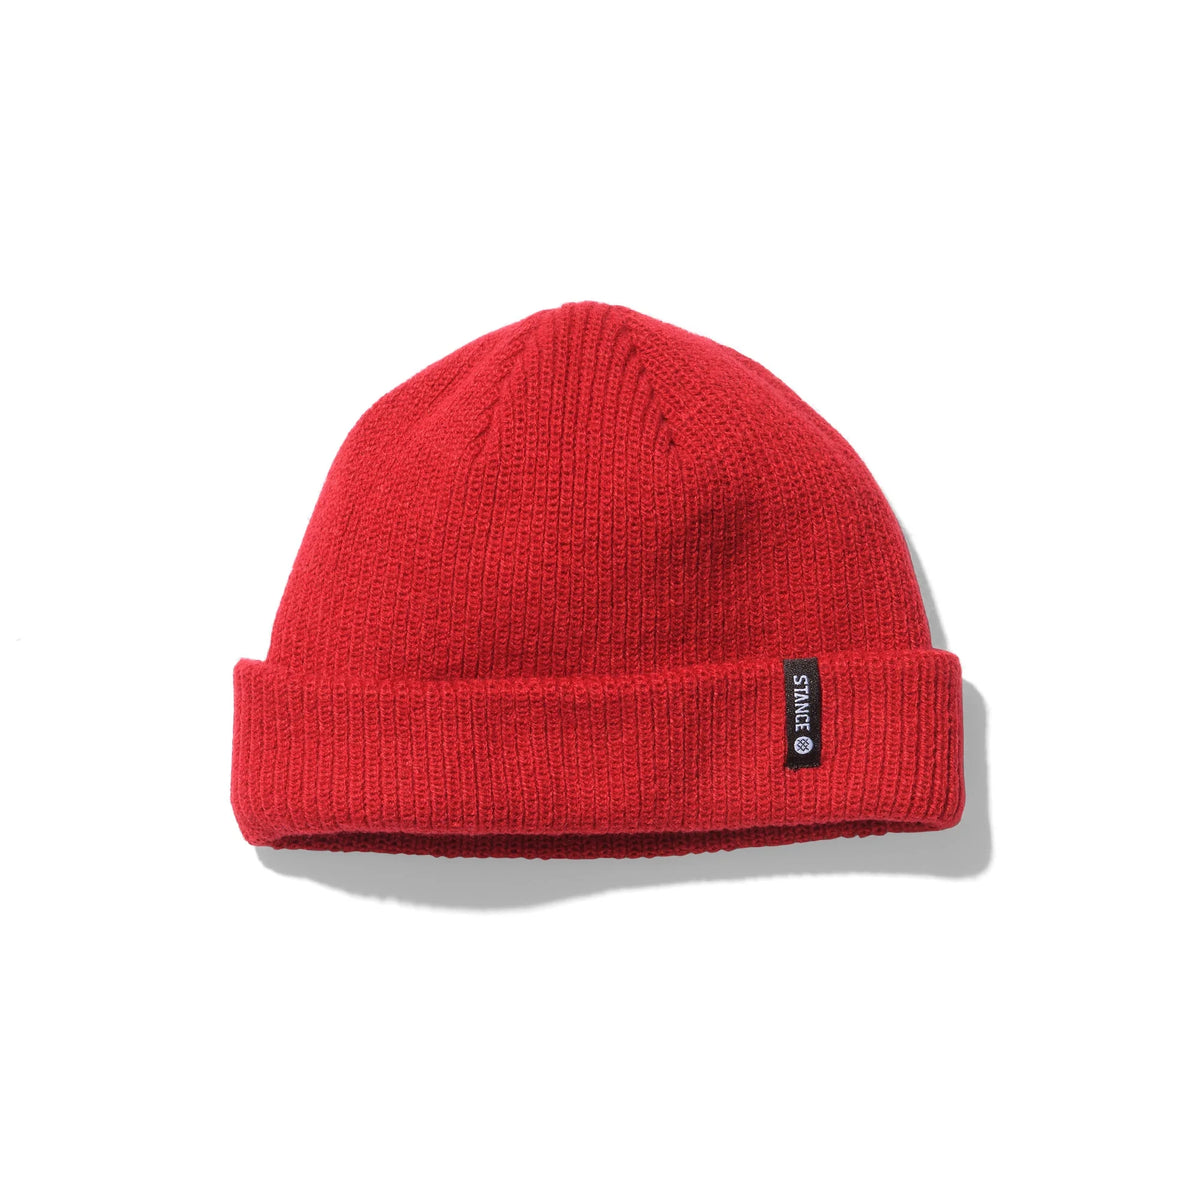 Stance ICON 2 Shallow Beanie Hat - Red